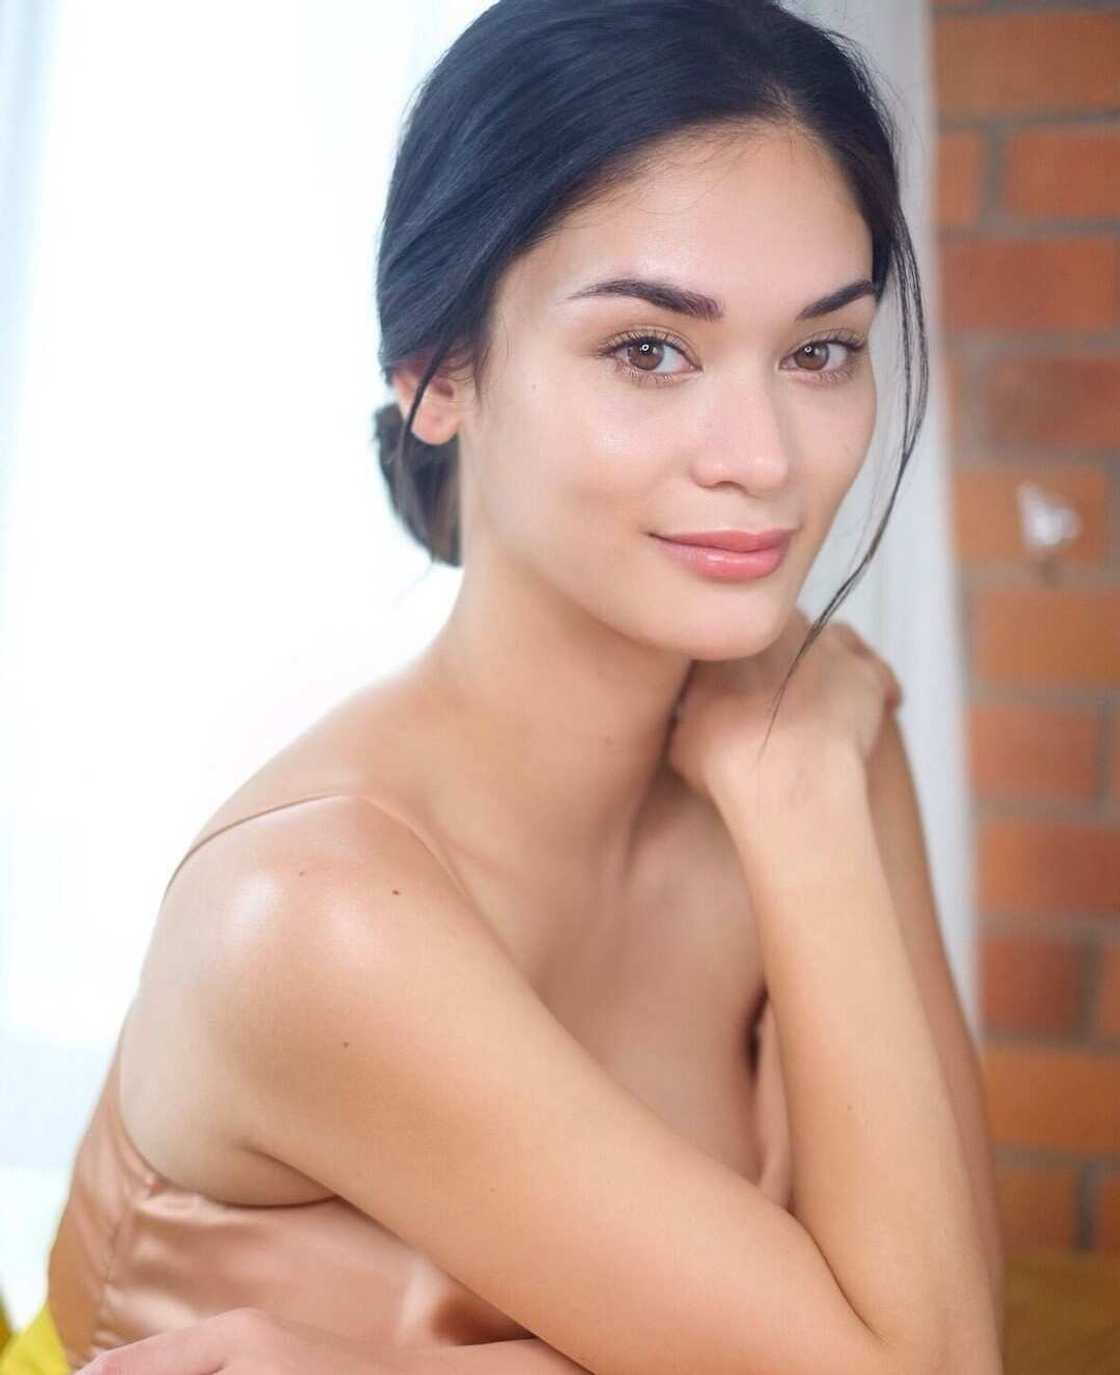 how old is Pia Wurtzbach